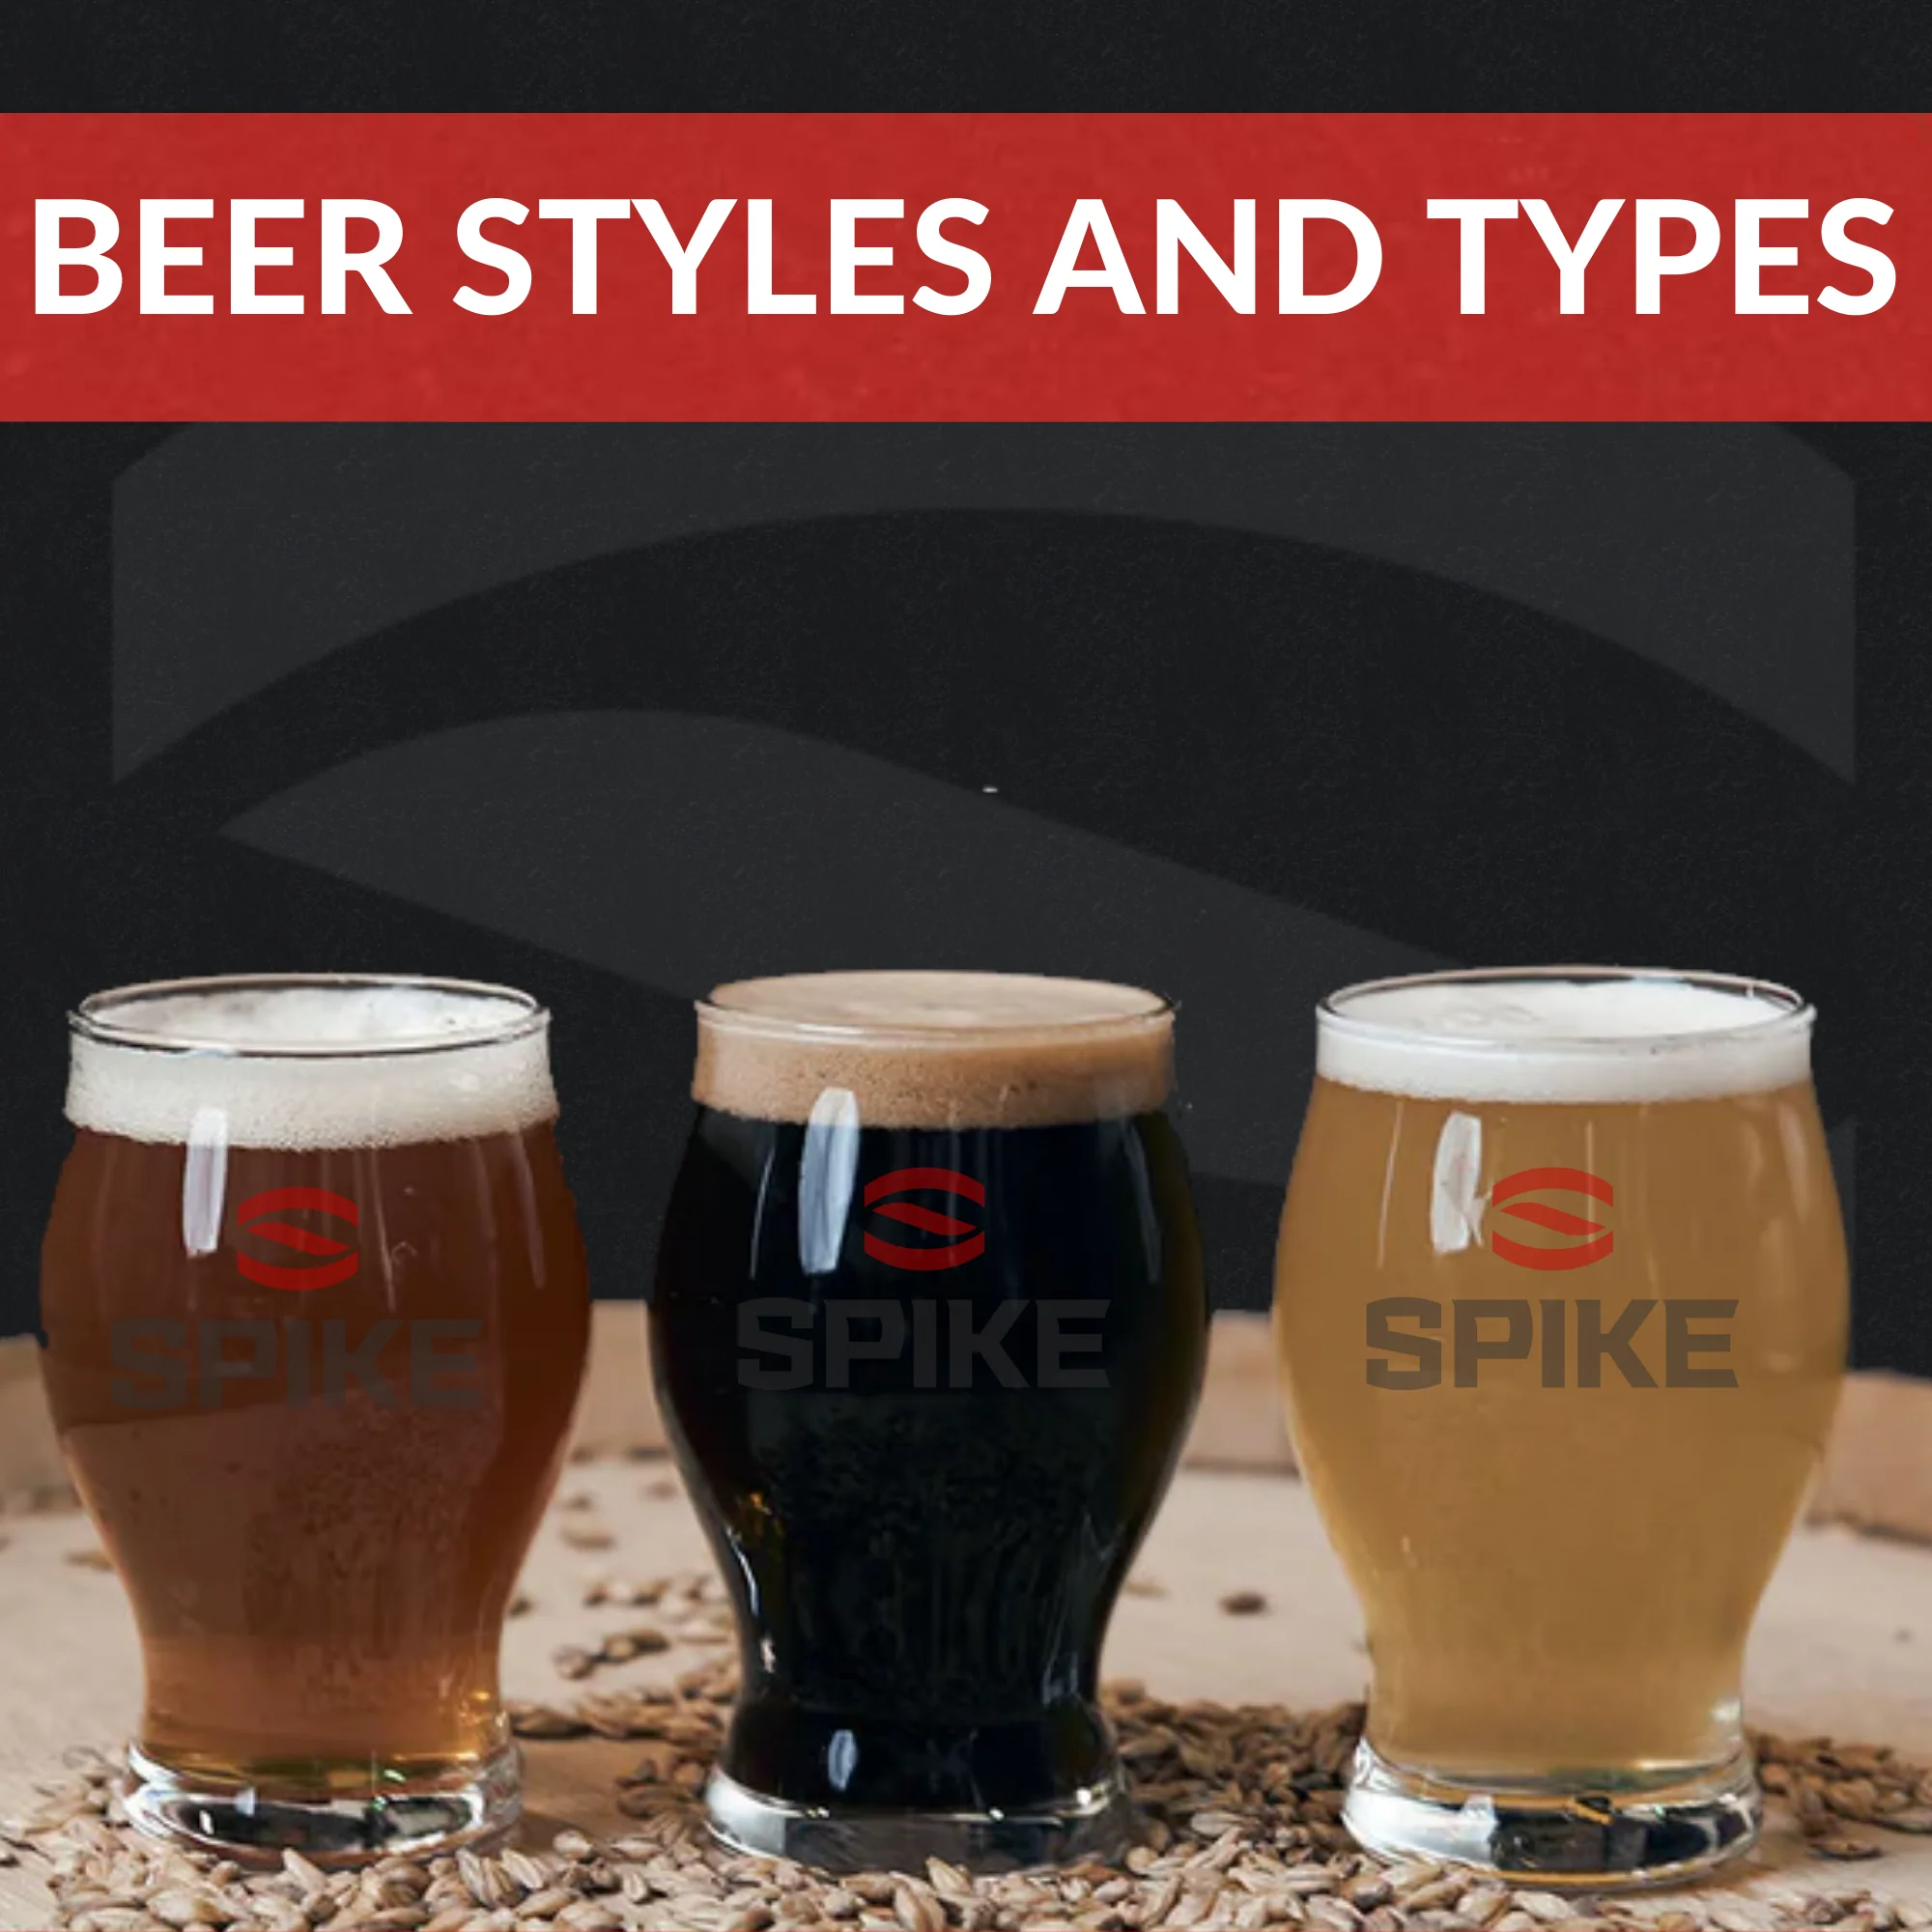 Which beer style is known for its light and delicate flavor?